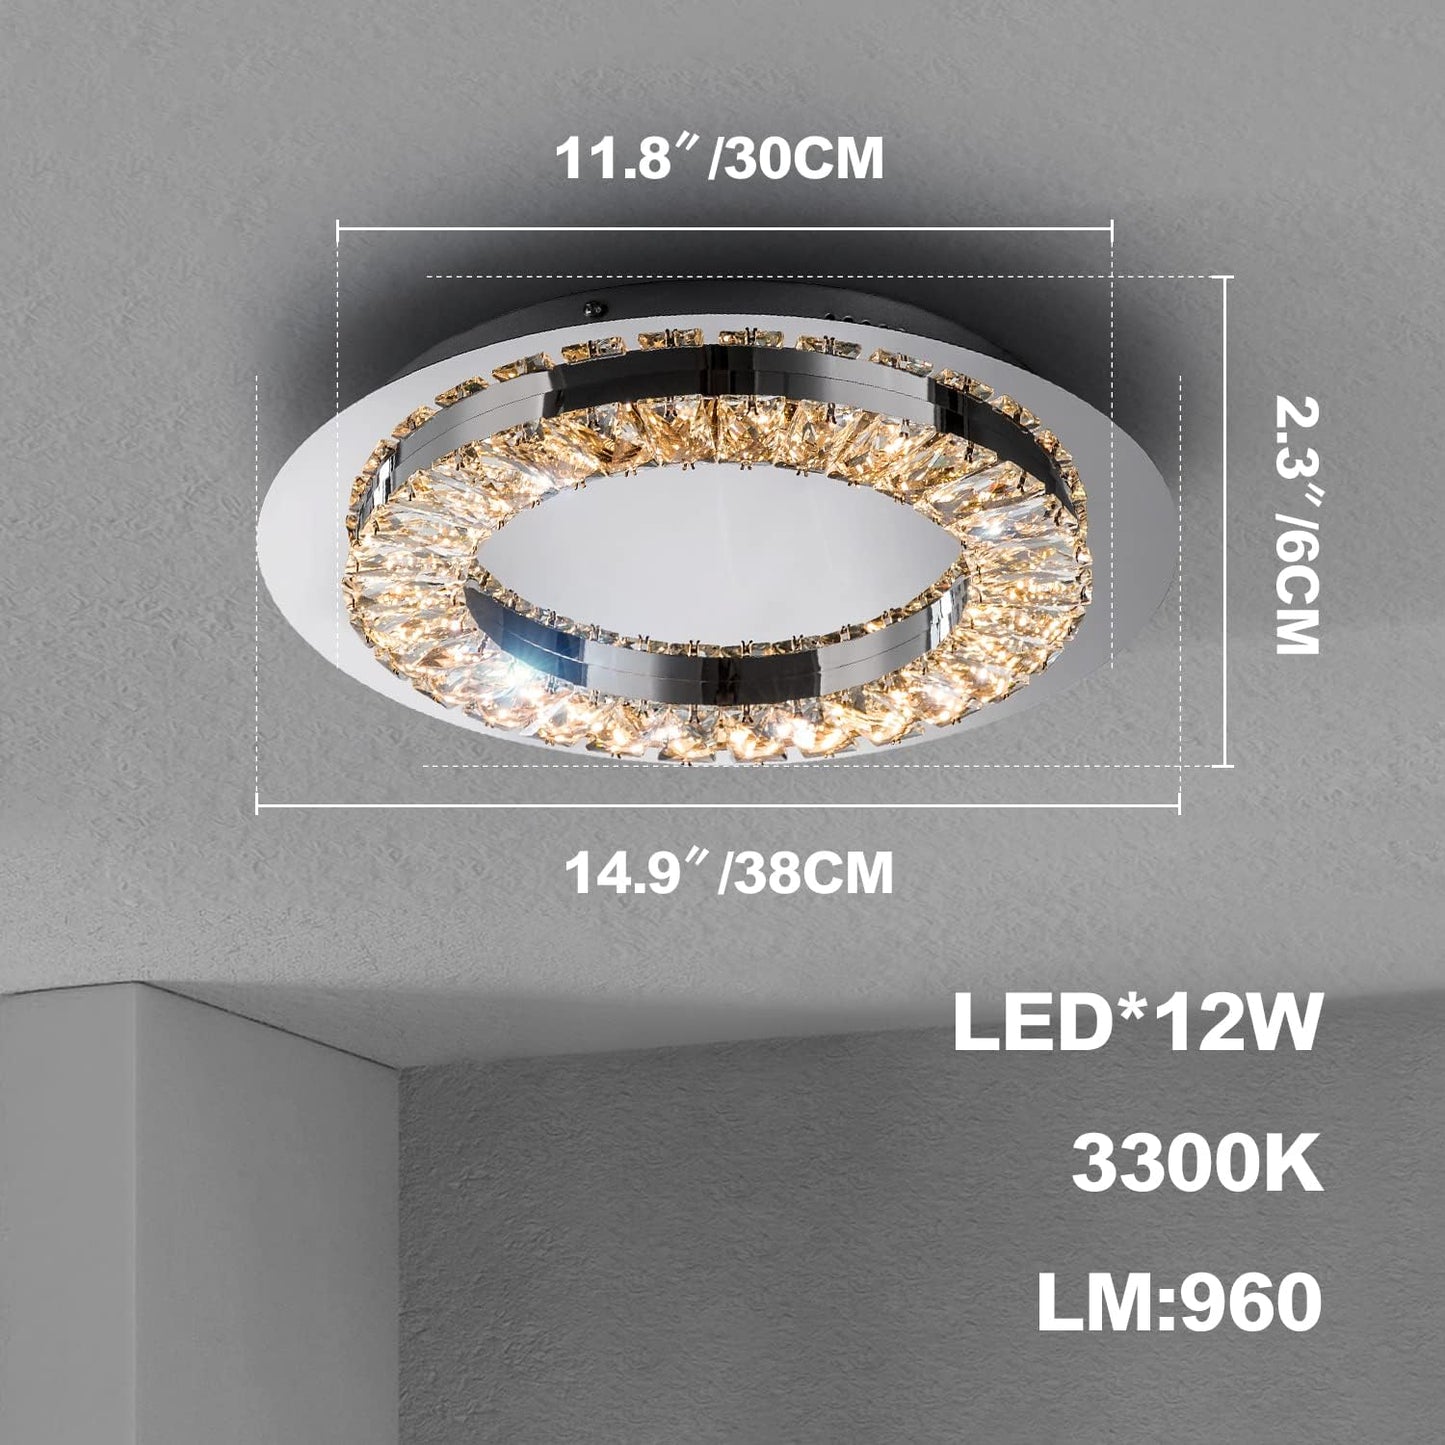 Crystal Ceiling Light Fixture for Closet/Close to Ceiling Light Fixtures Flush Mount 3300K LED Modern round 15" Surface Chandelier for Bedroom Hallway Stairwell Living Dining Room Lighting